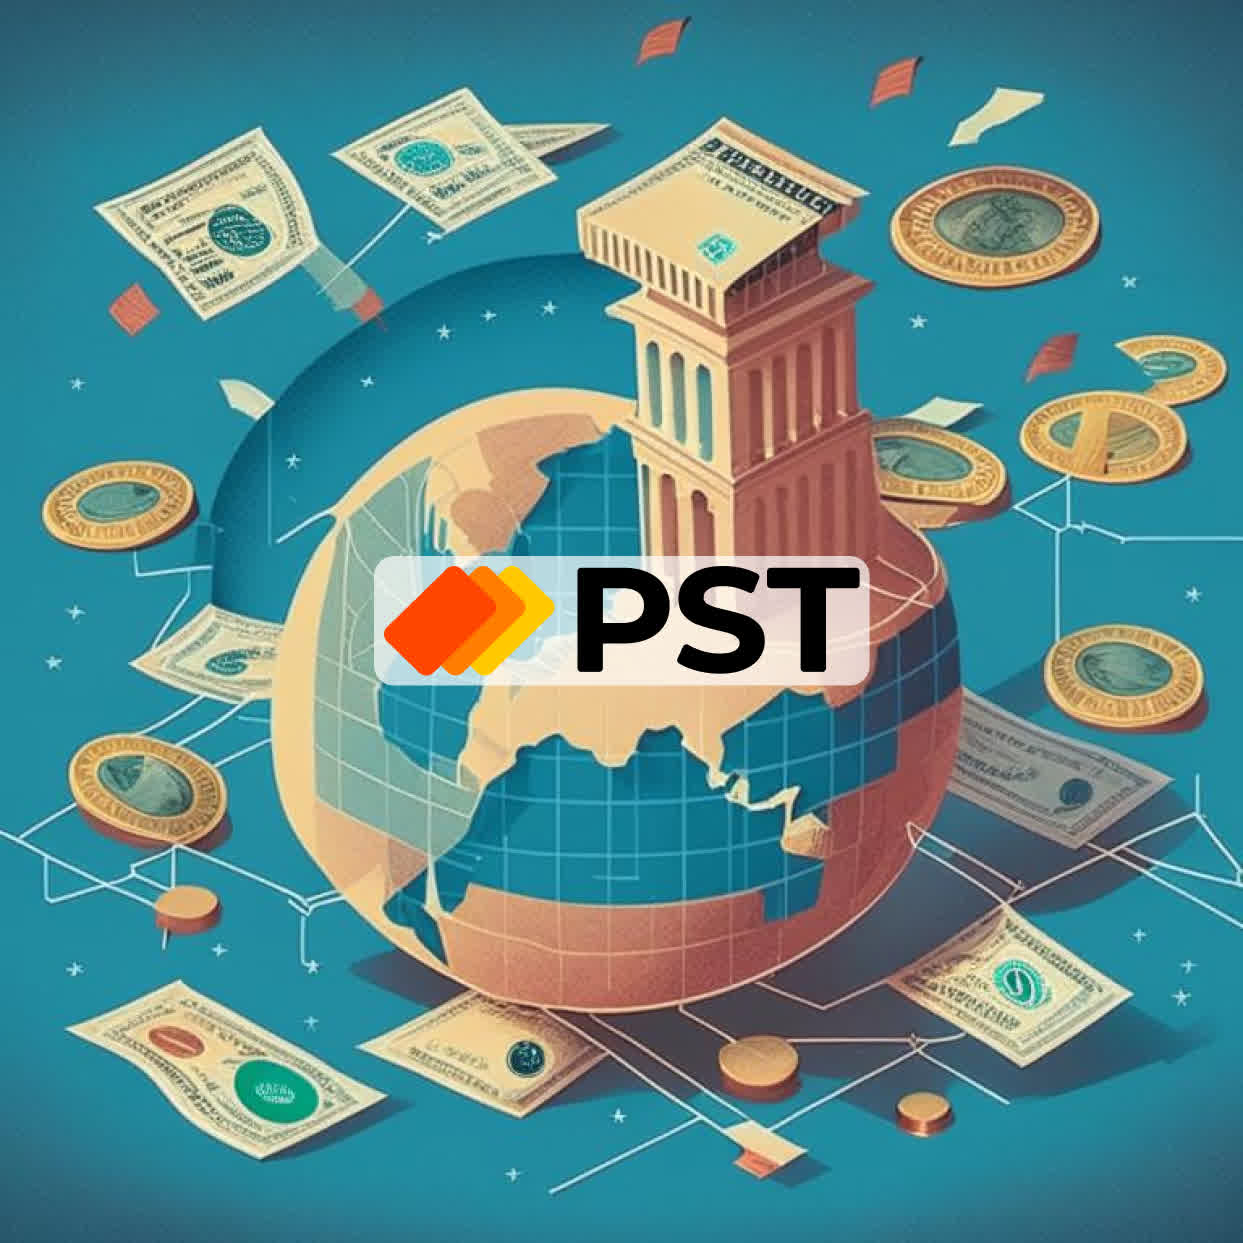 How to Make Large Payments Using Virtual Cards from PSTNET?